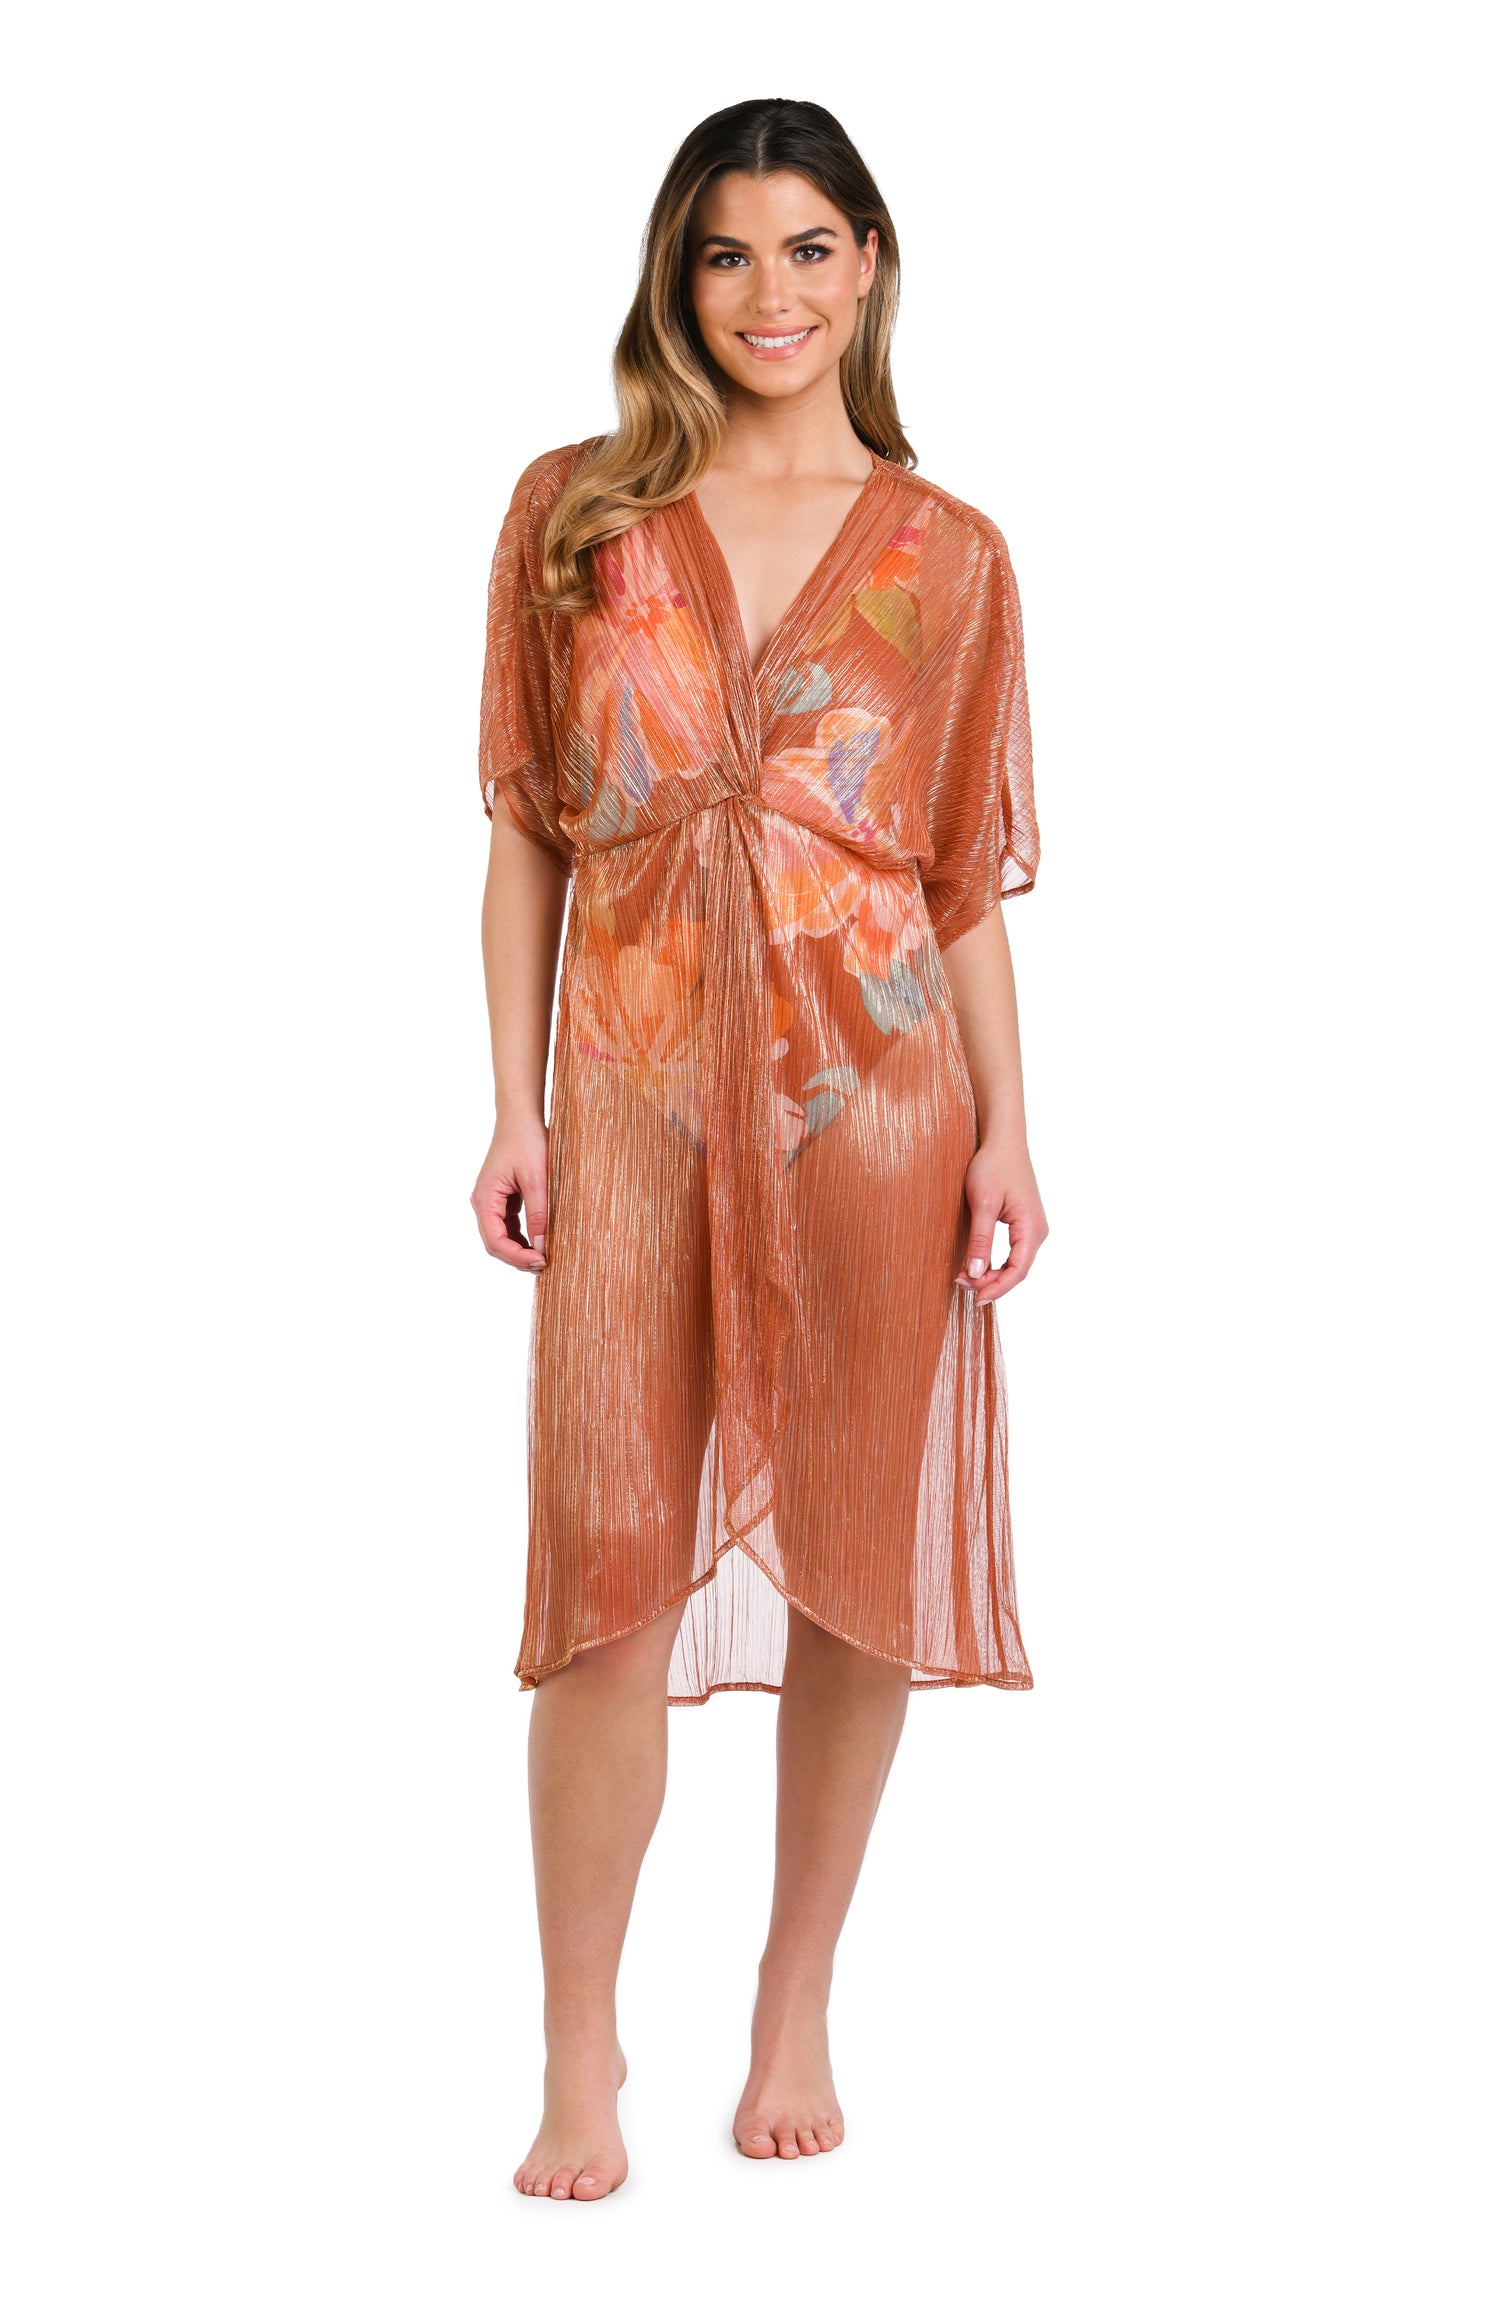 Model is wearing a shimmering orange and pink short sleeve midi dress cover up.